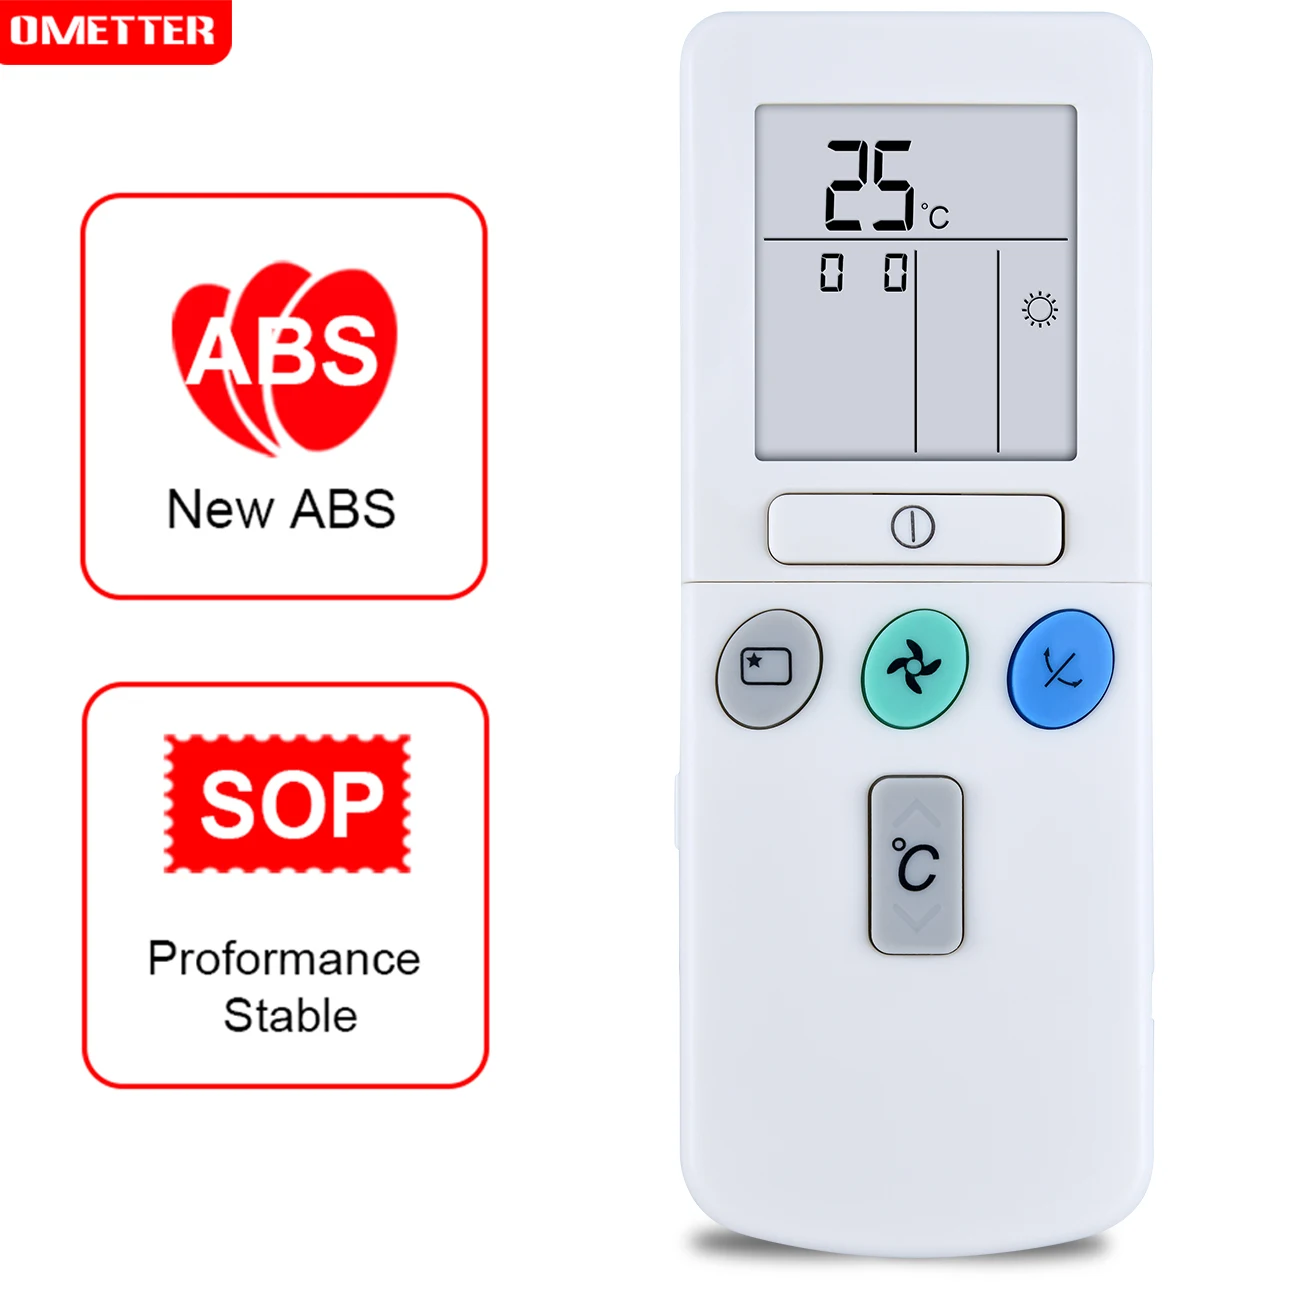 

Remote Air Conditioning Universal Remote Control For Hitachi RAR-3U4 RAR-2P2 RAR-3U1 RAR-3U2 RAR-3U3 A/C Fernbedienung